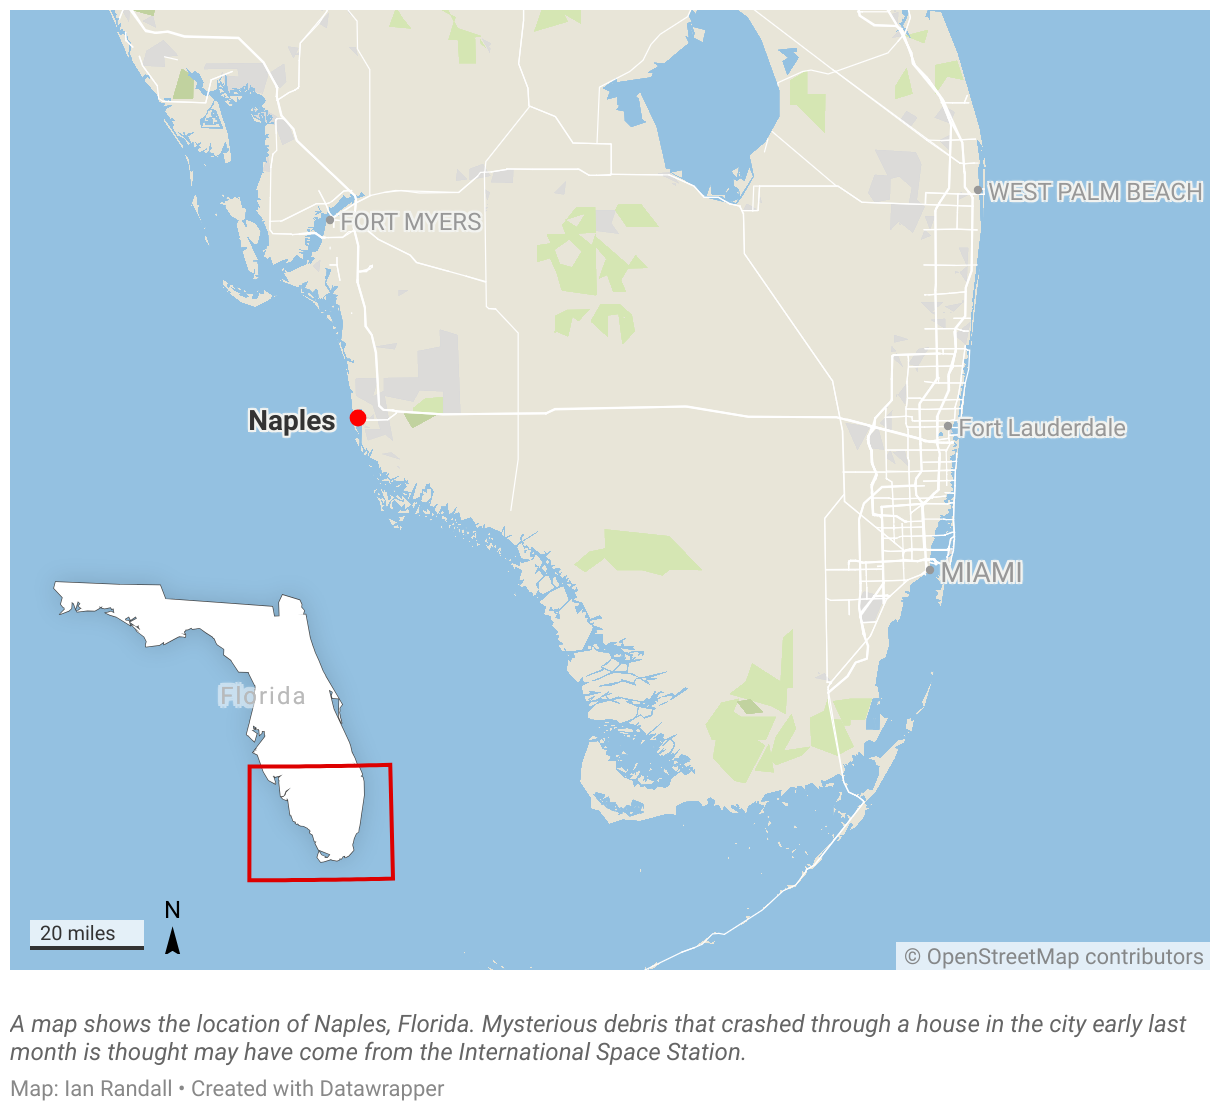 A map shows the location of the city of Naples, Florida.